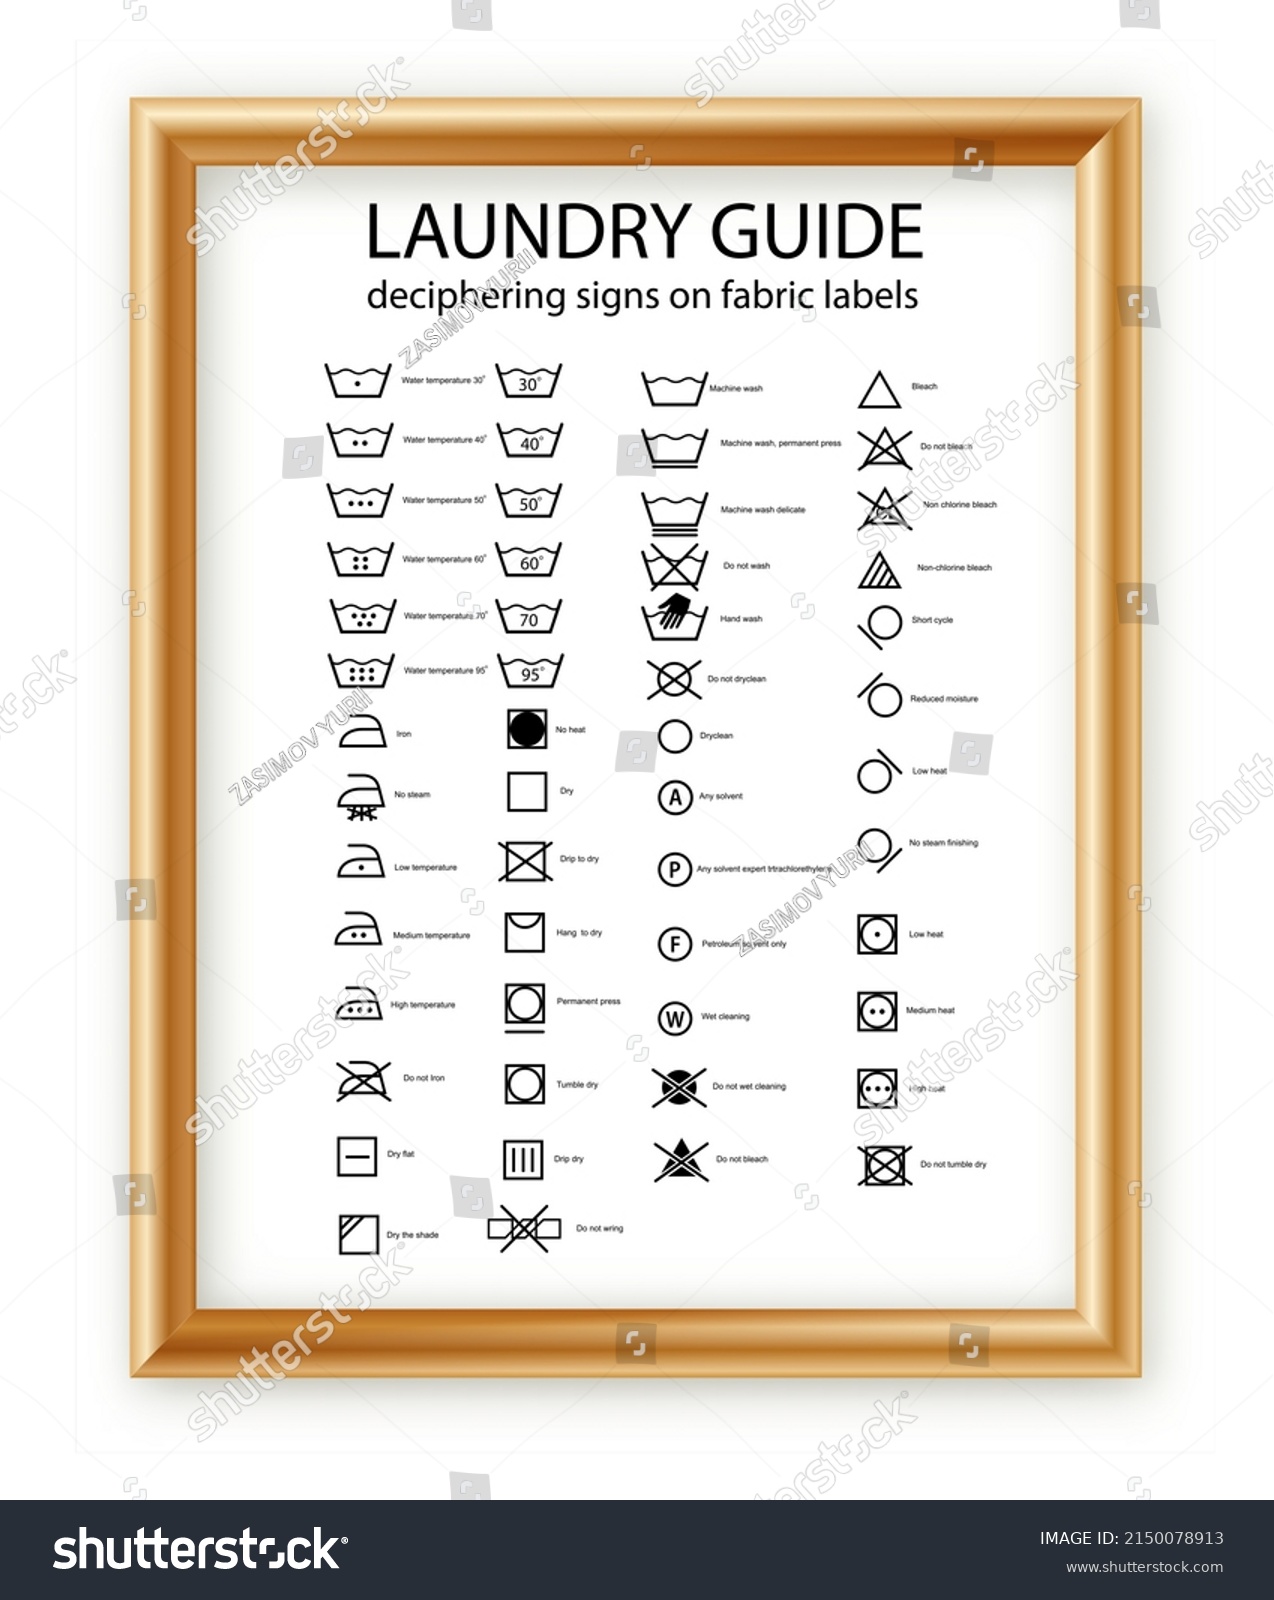 SVG of Laundry icons. Garment care instructions on labels, machine wash or hand wash signs. Collection of symbols of water temperature, ironing and drying, types of textiles and fabrics.Vector svg